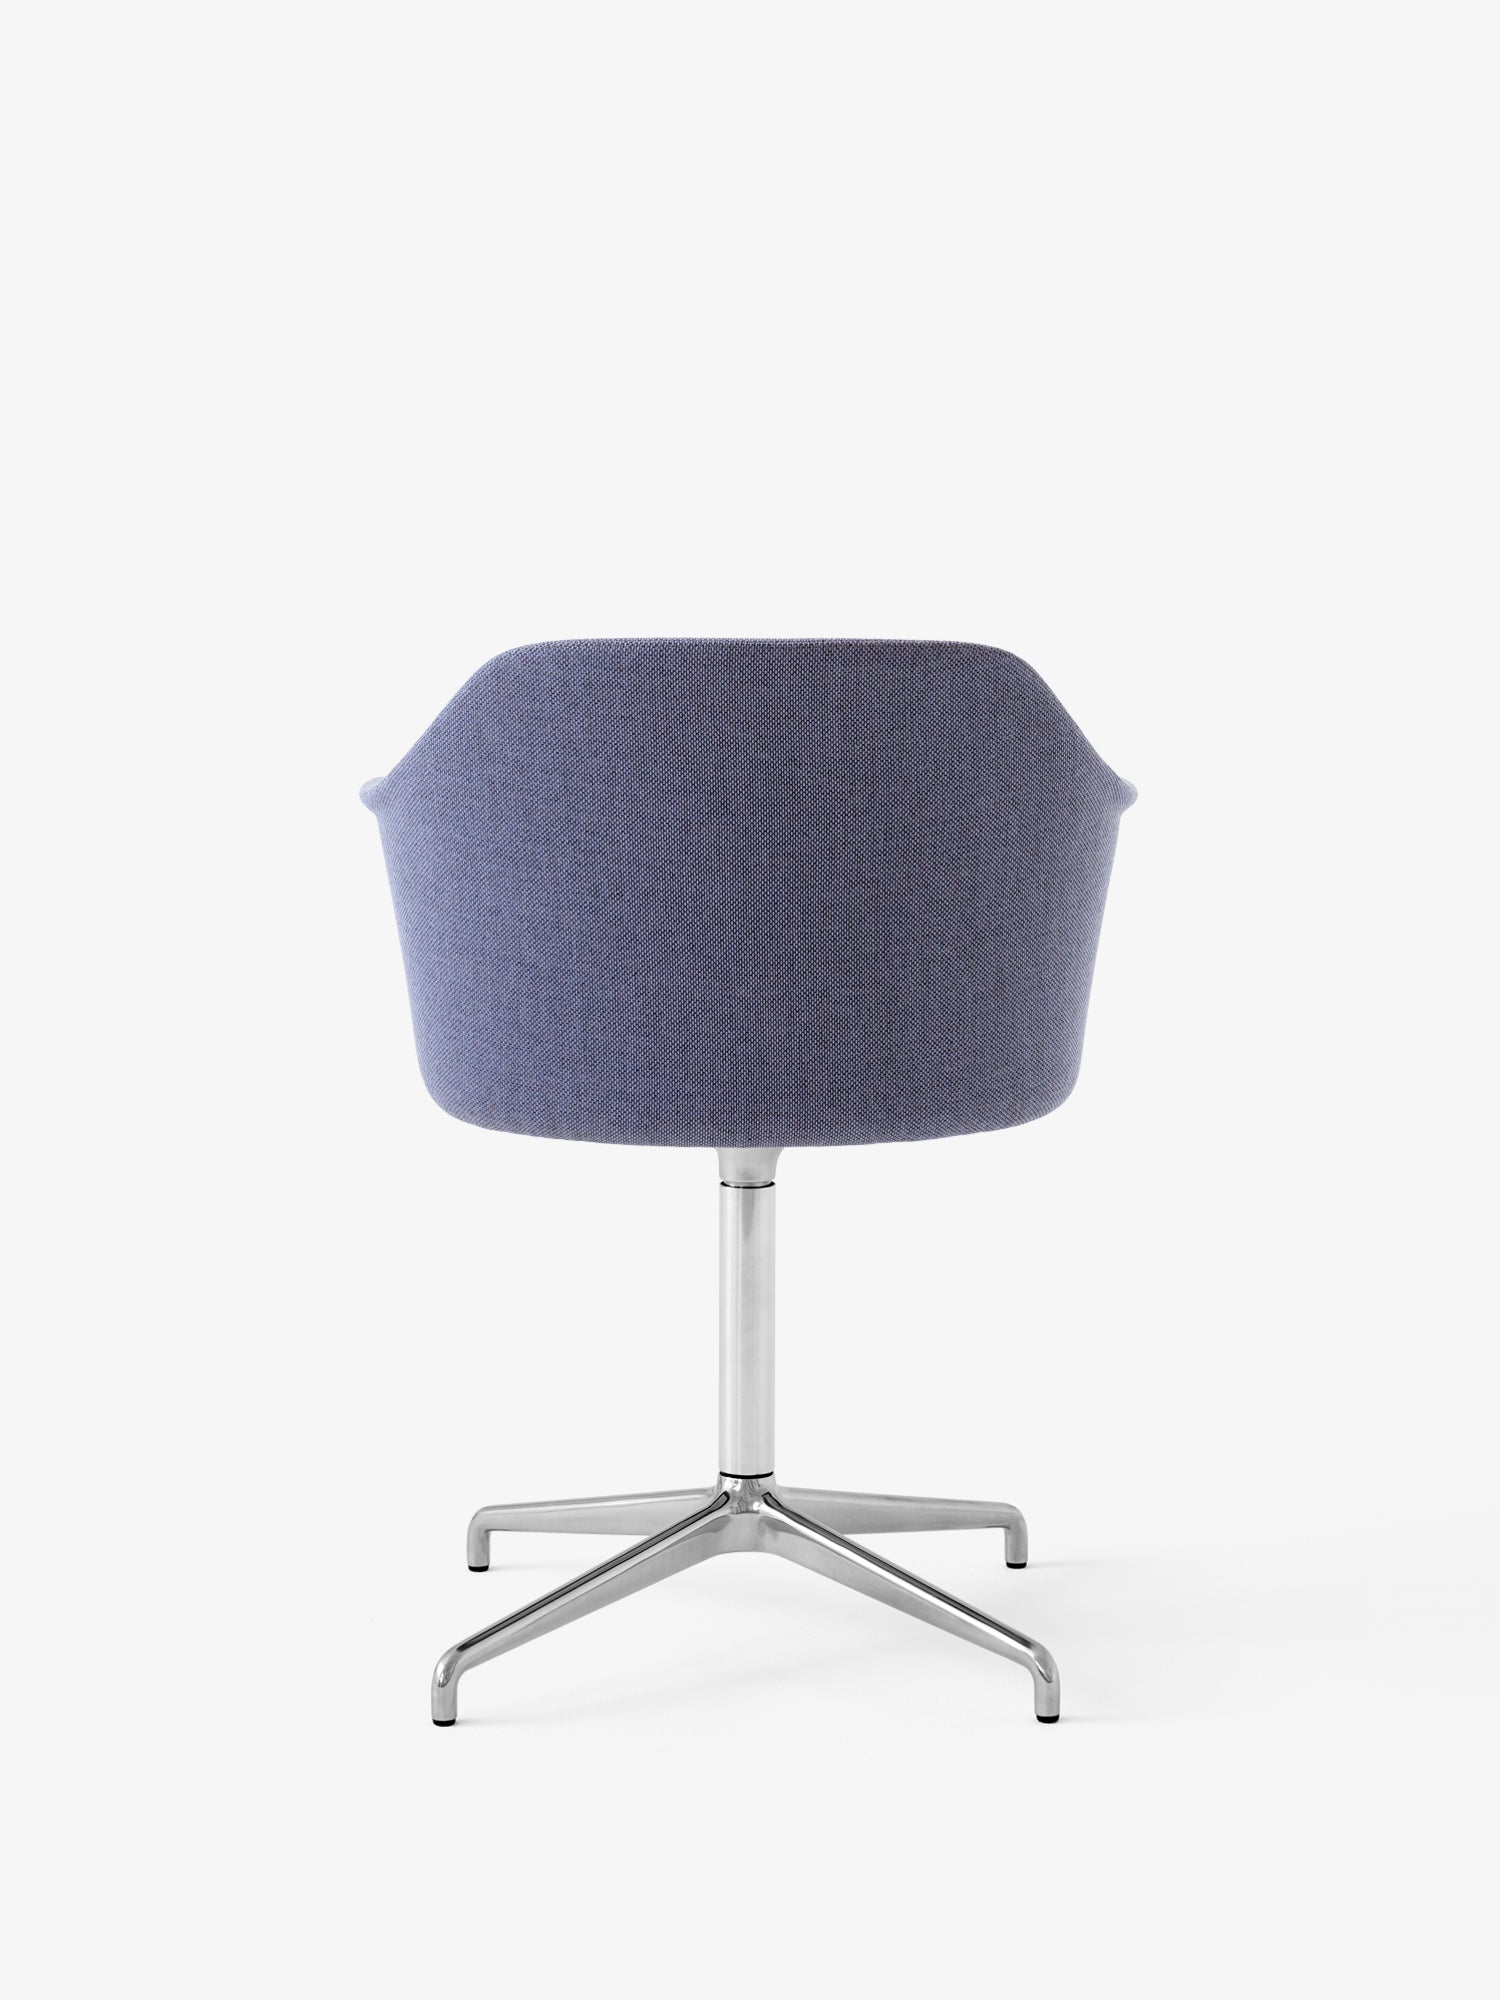 Rely HW40 Armchair